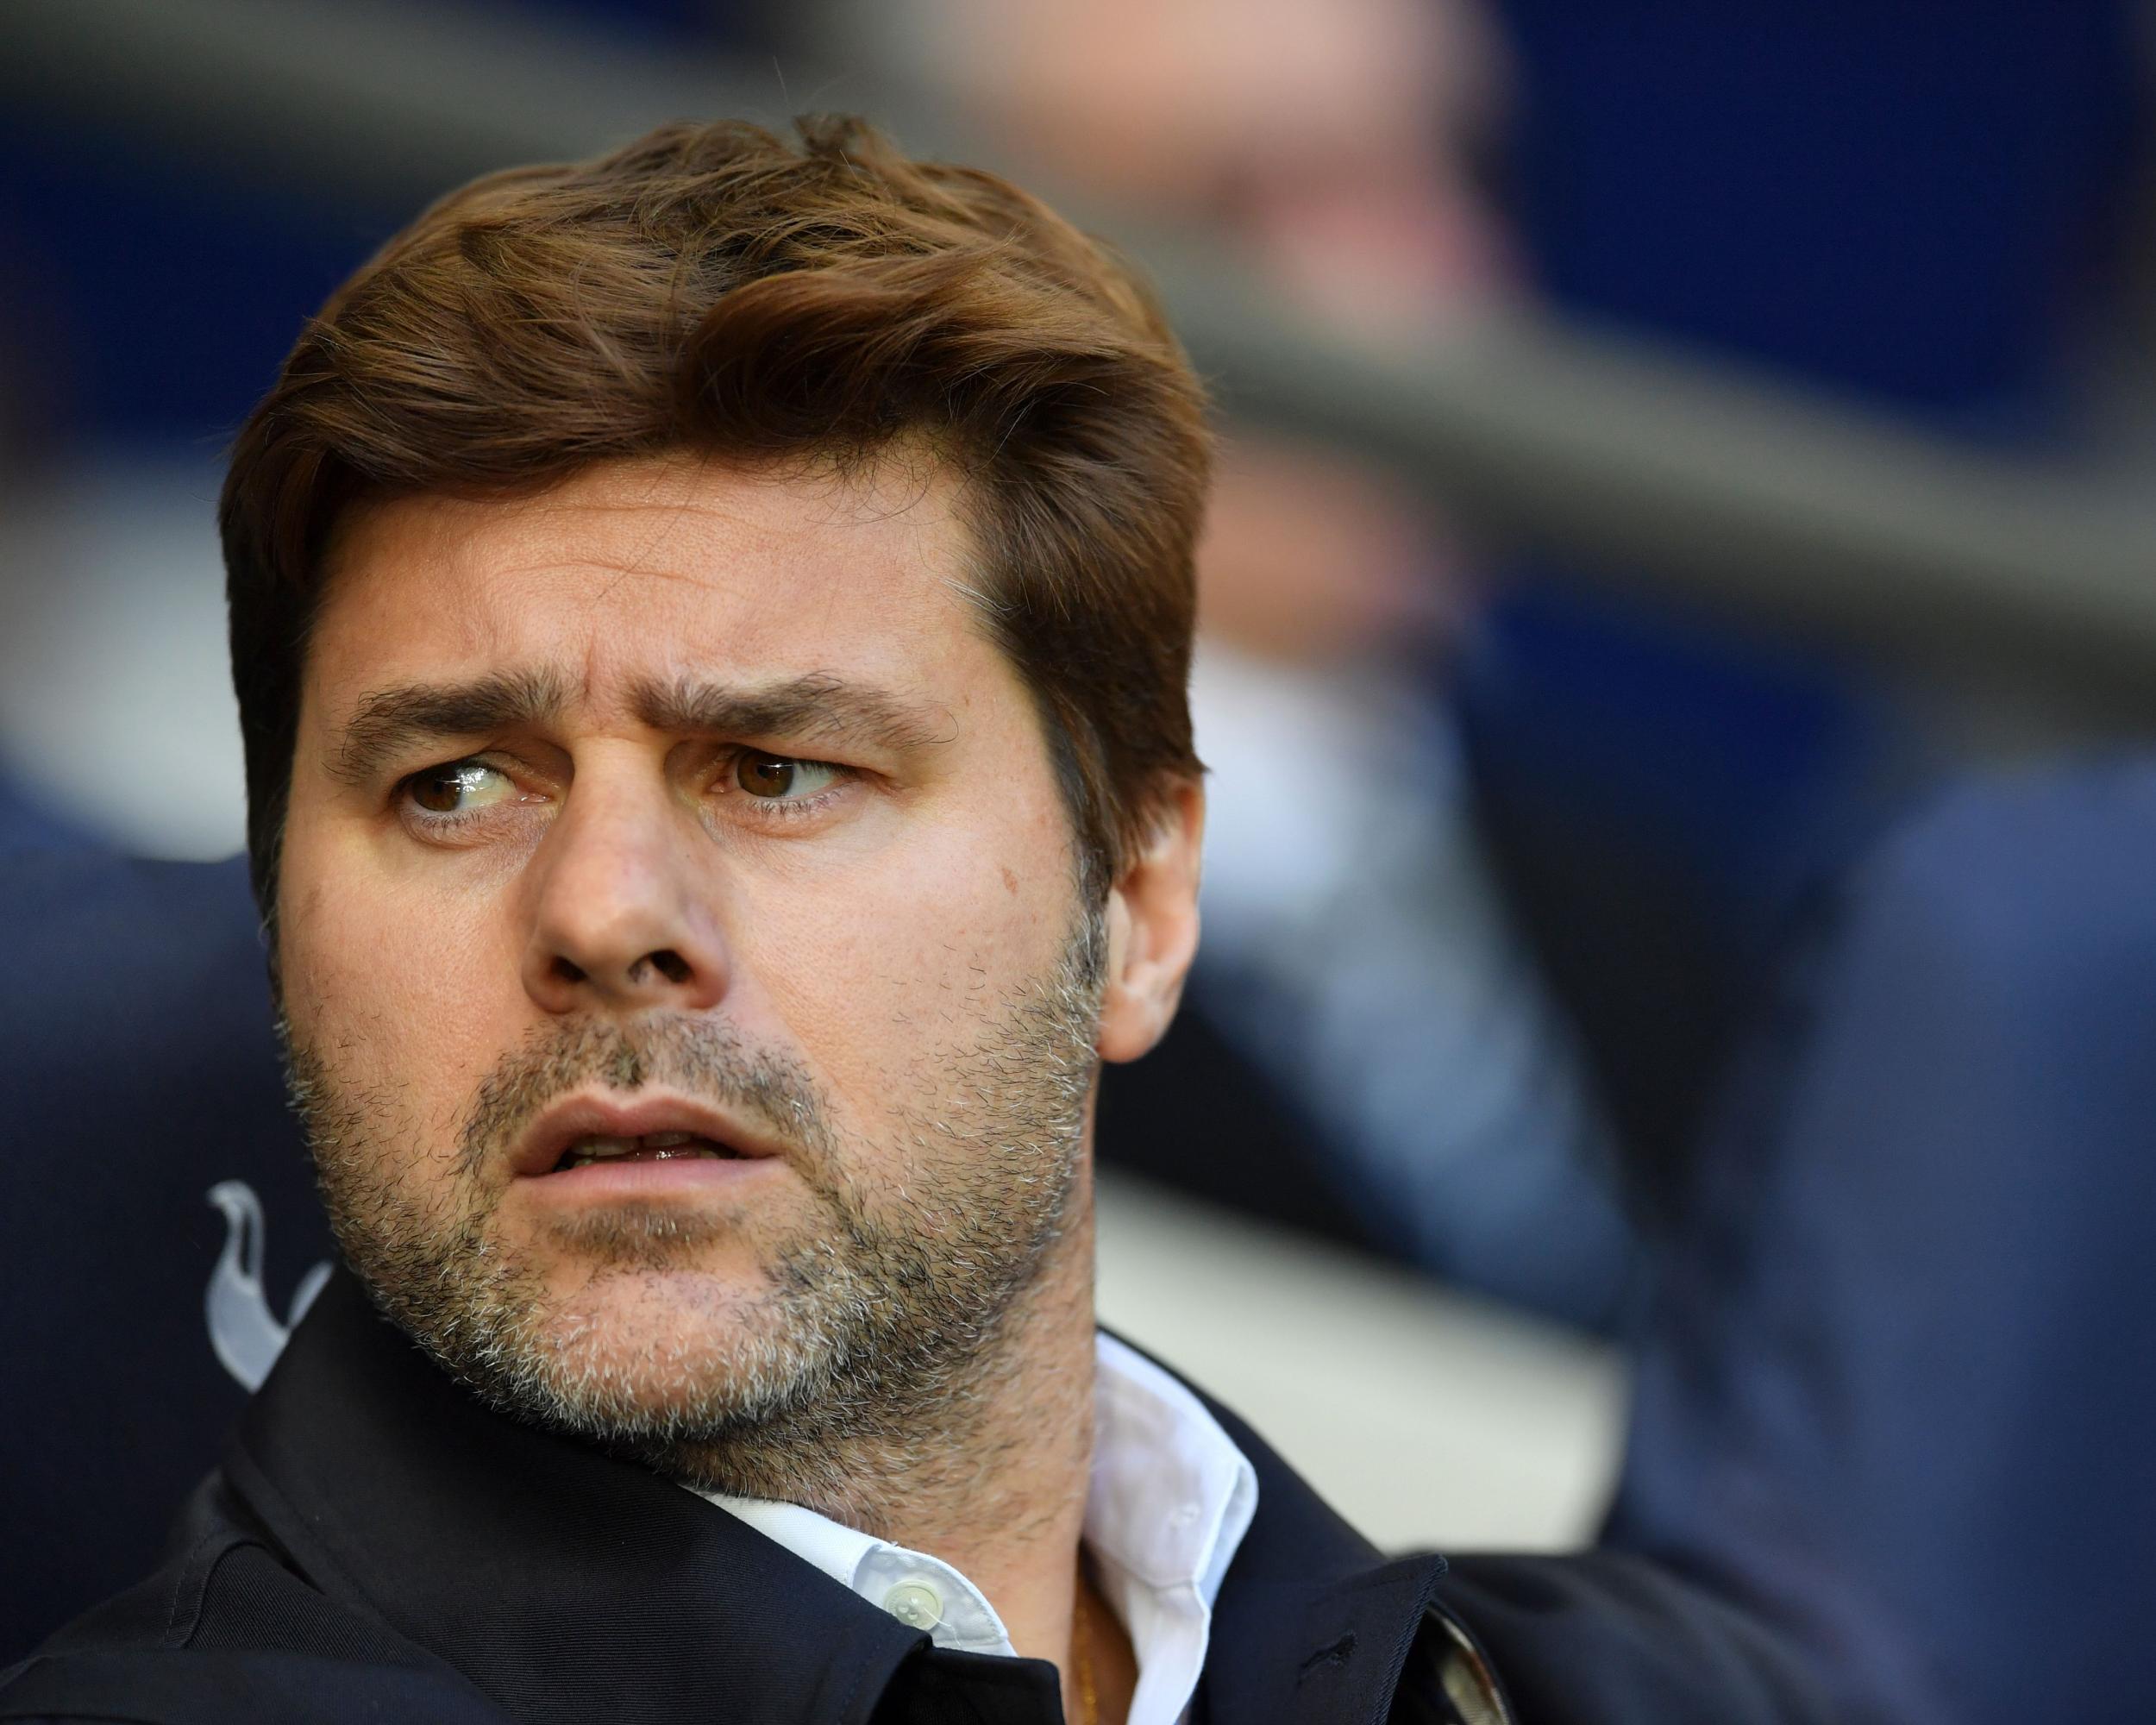 Pochettino is focusing on the 'real trophies' like the Premier League and Champions League